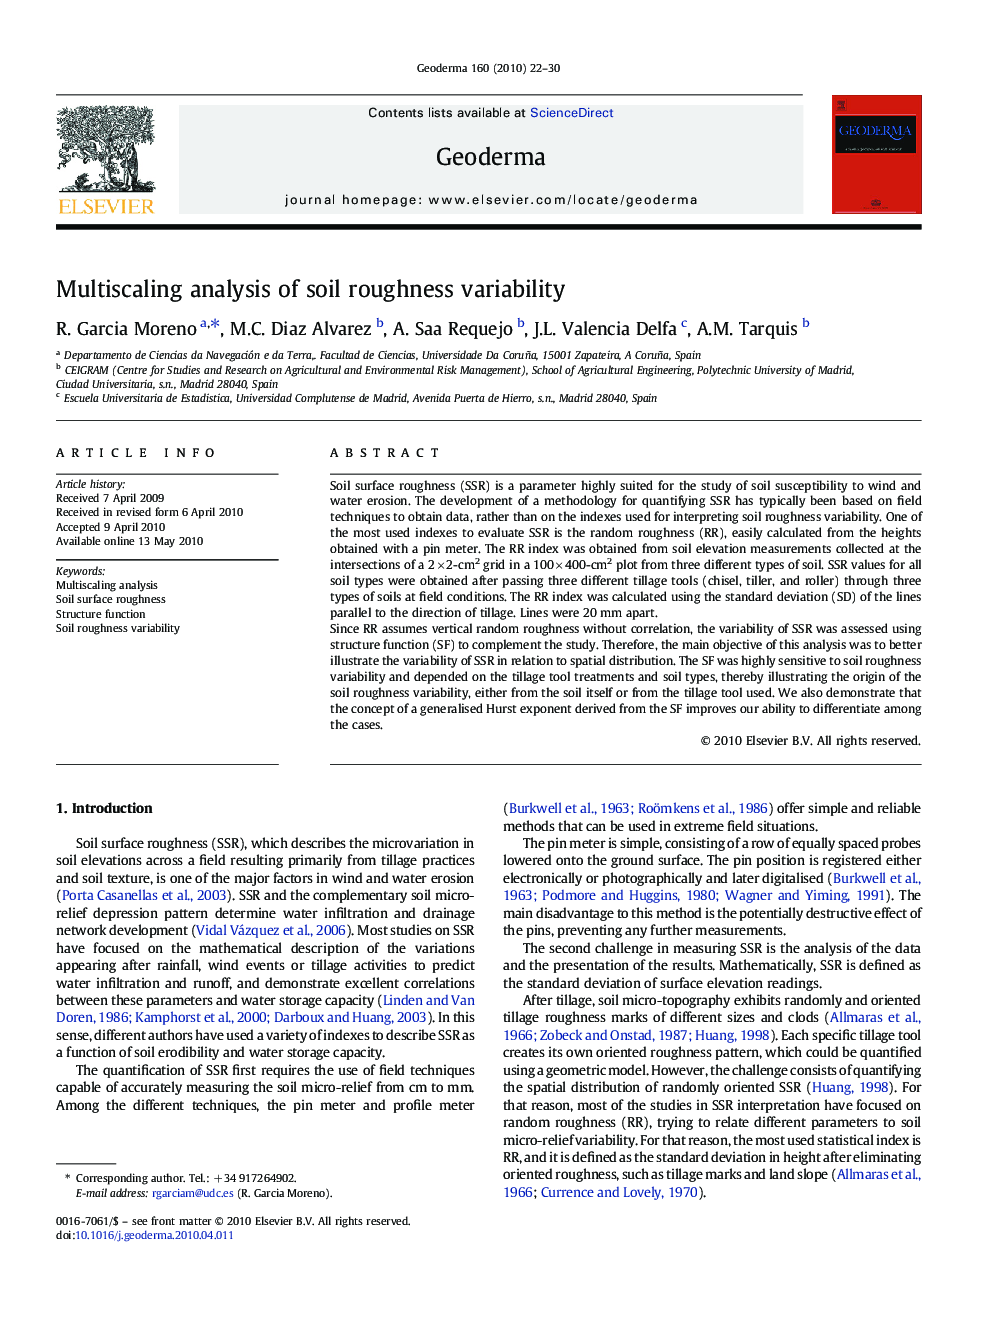 Multiscaling analysis of soil roughness variability